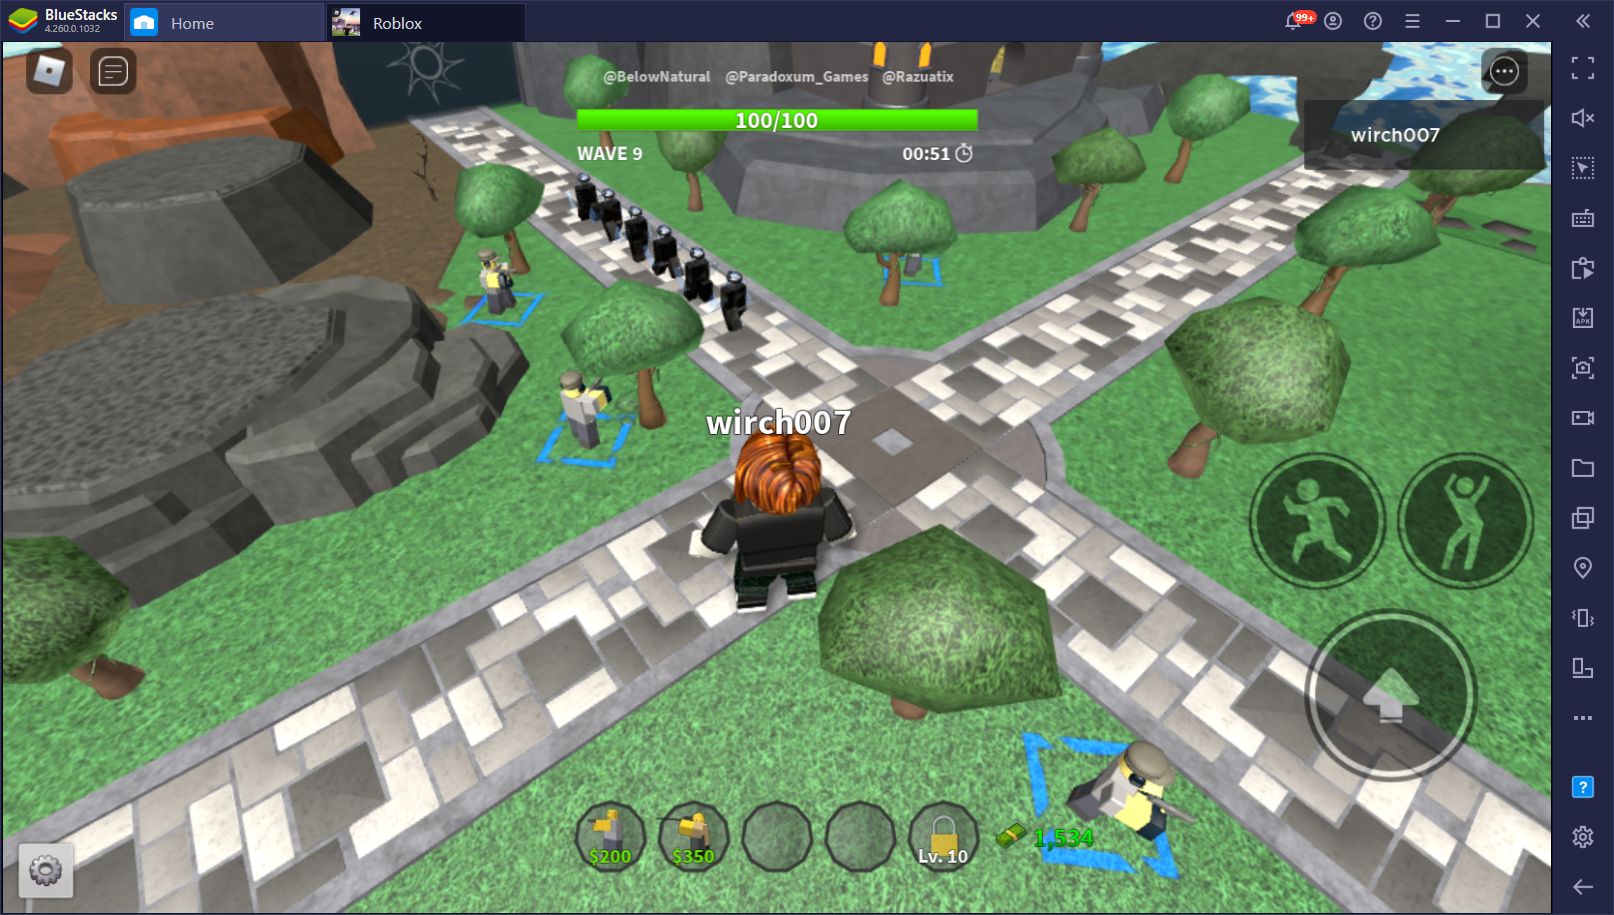 The Best Roblox Games to Play in 2021